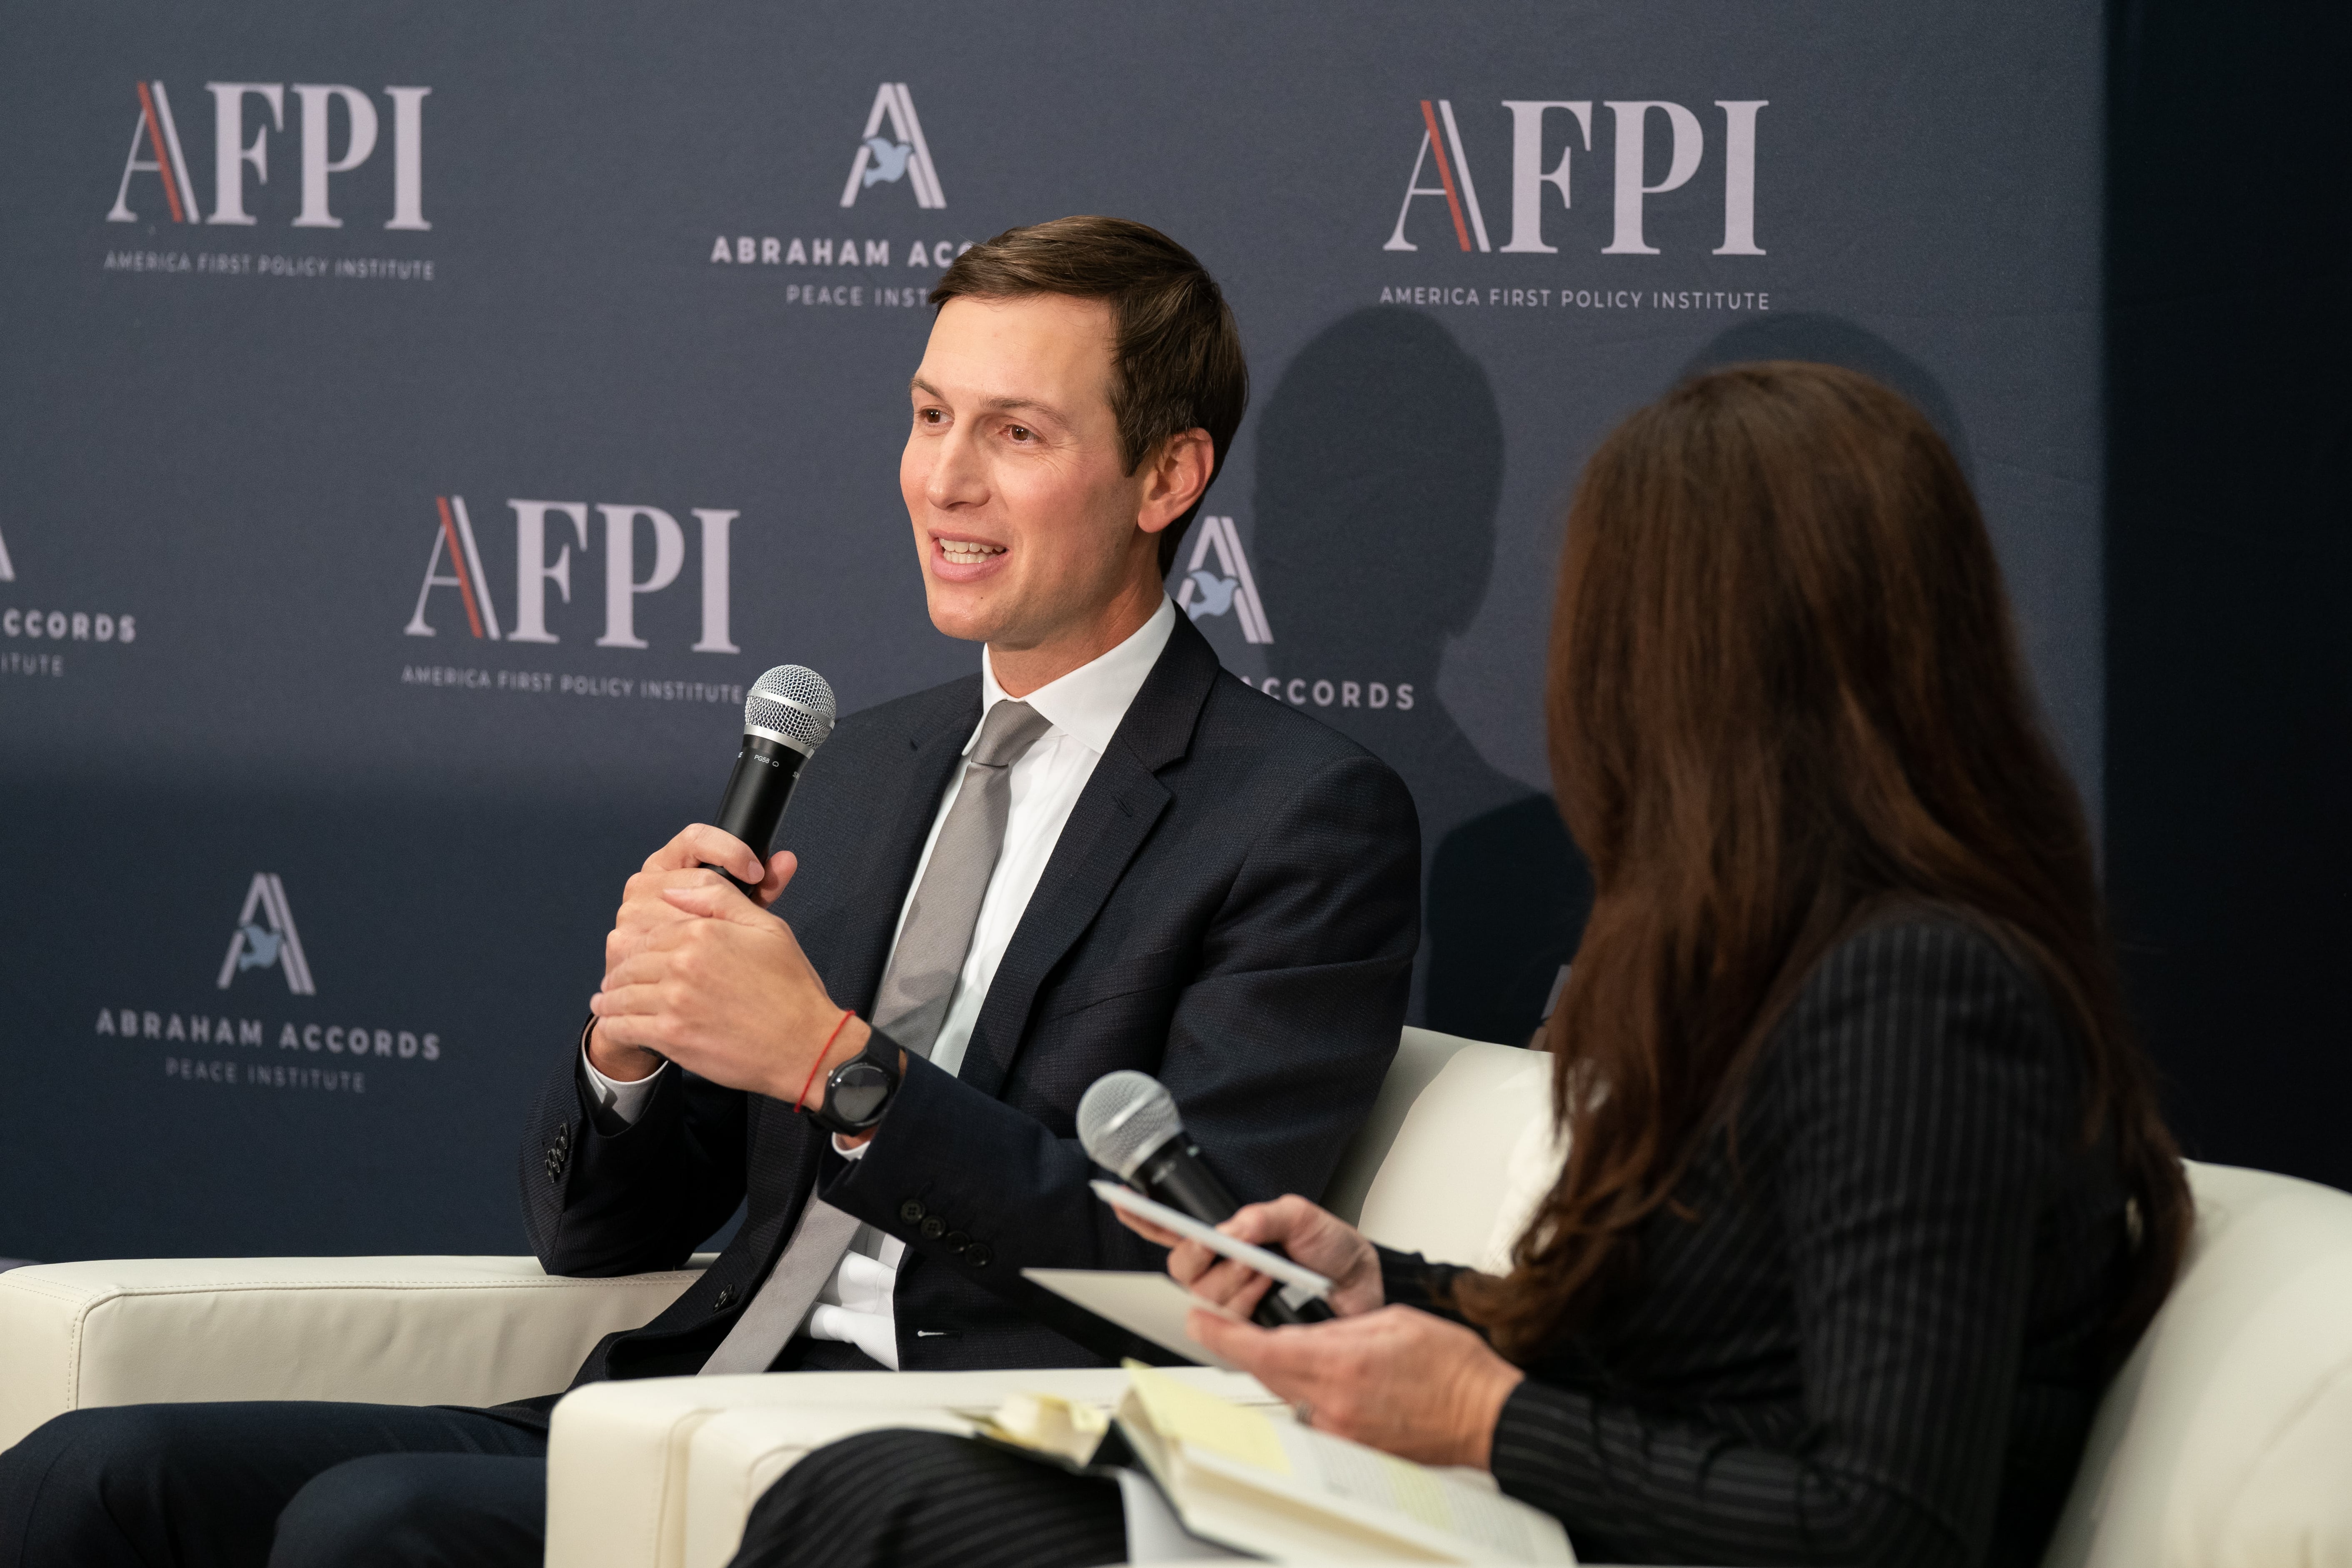 In a fireside conversation, Jared Kushner discusses the Abraham Accords with AFPI's Brooke Rollins.